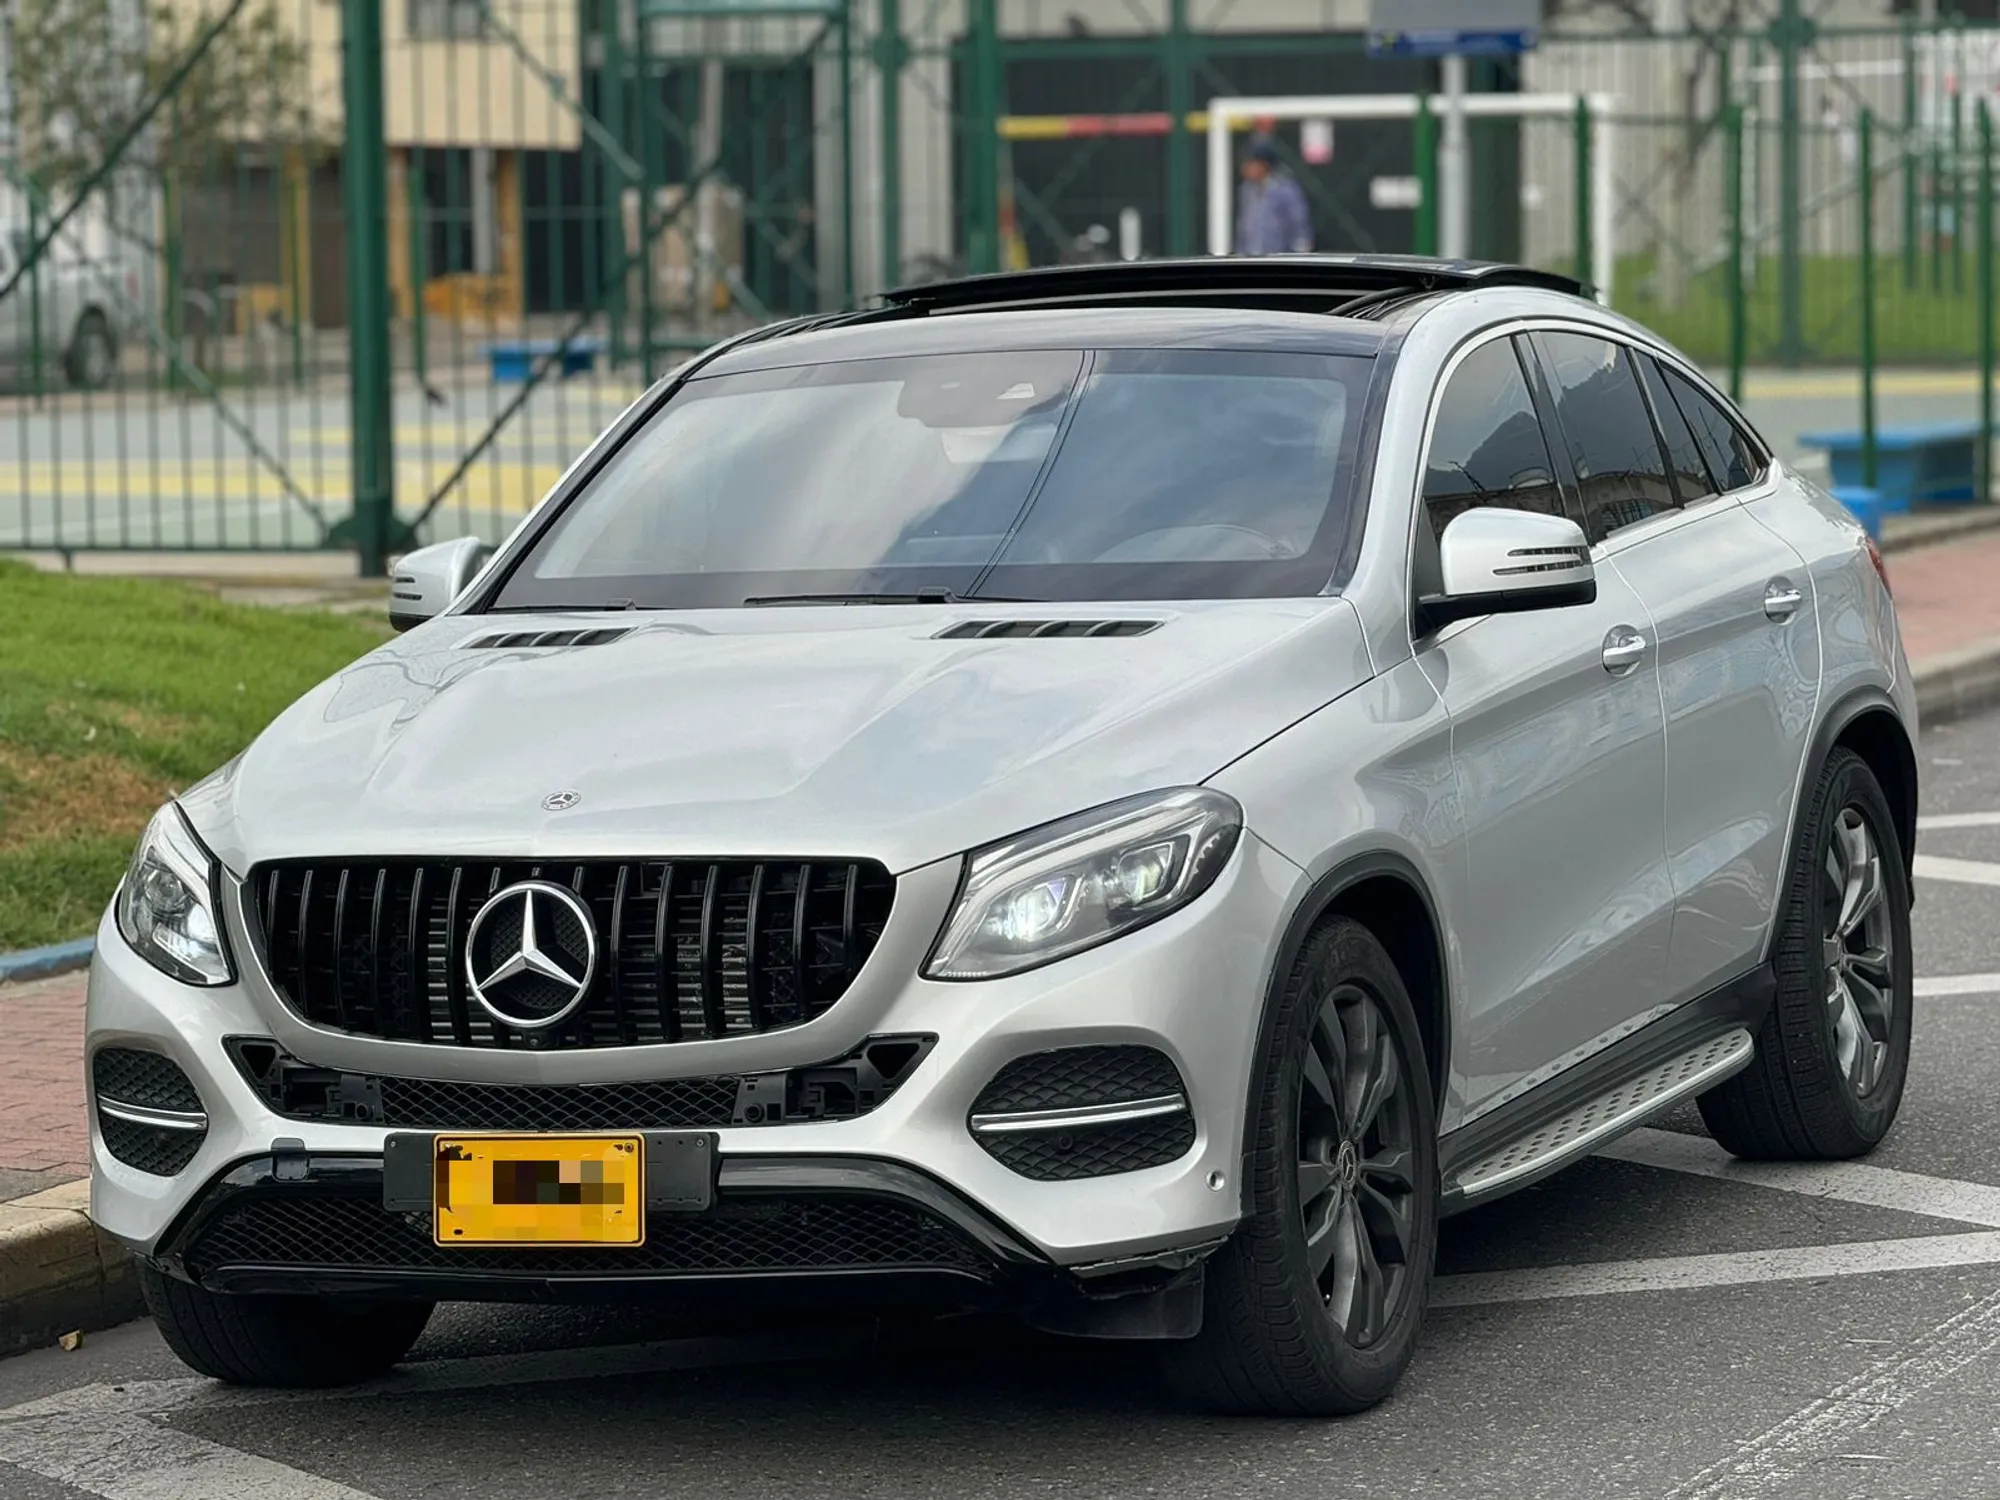 MERCEDES BENZ GLE 350d 4MATIC COUPE 2019 AT